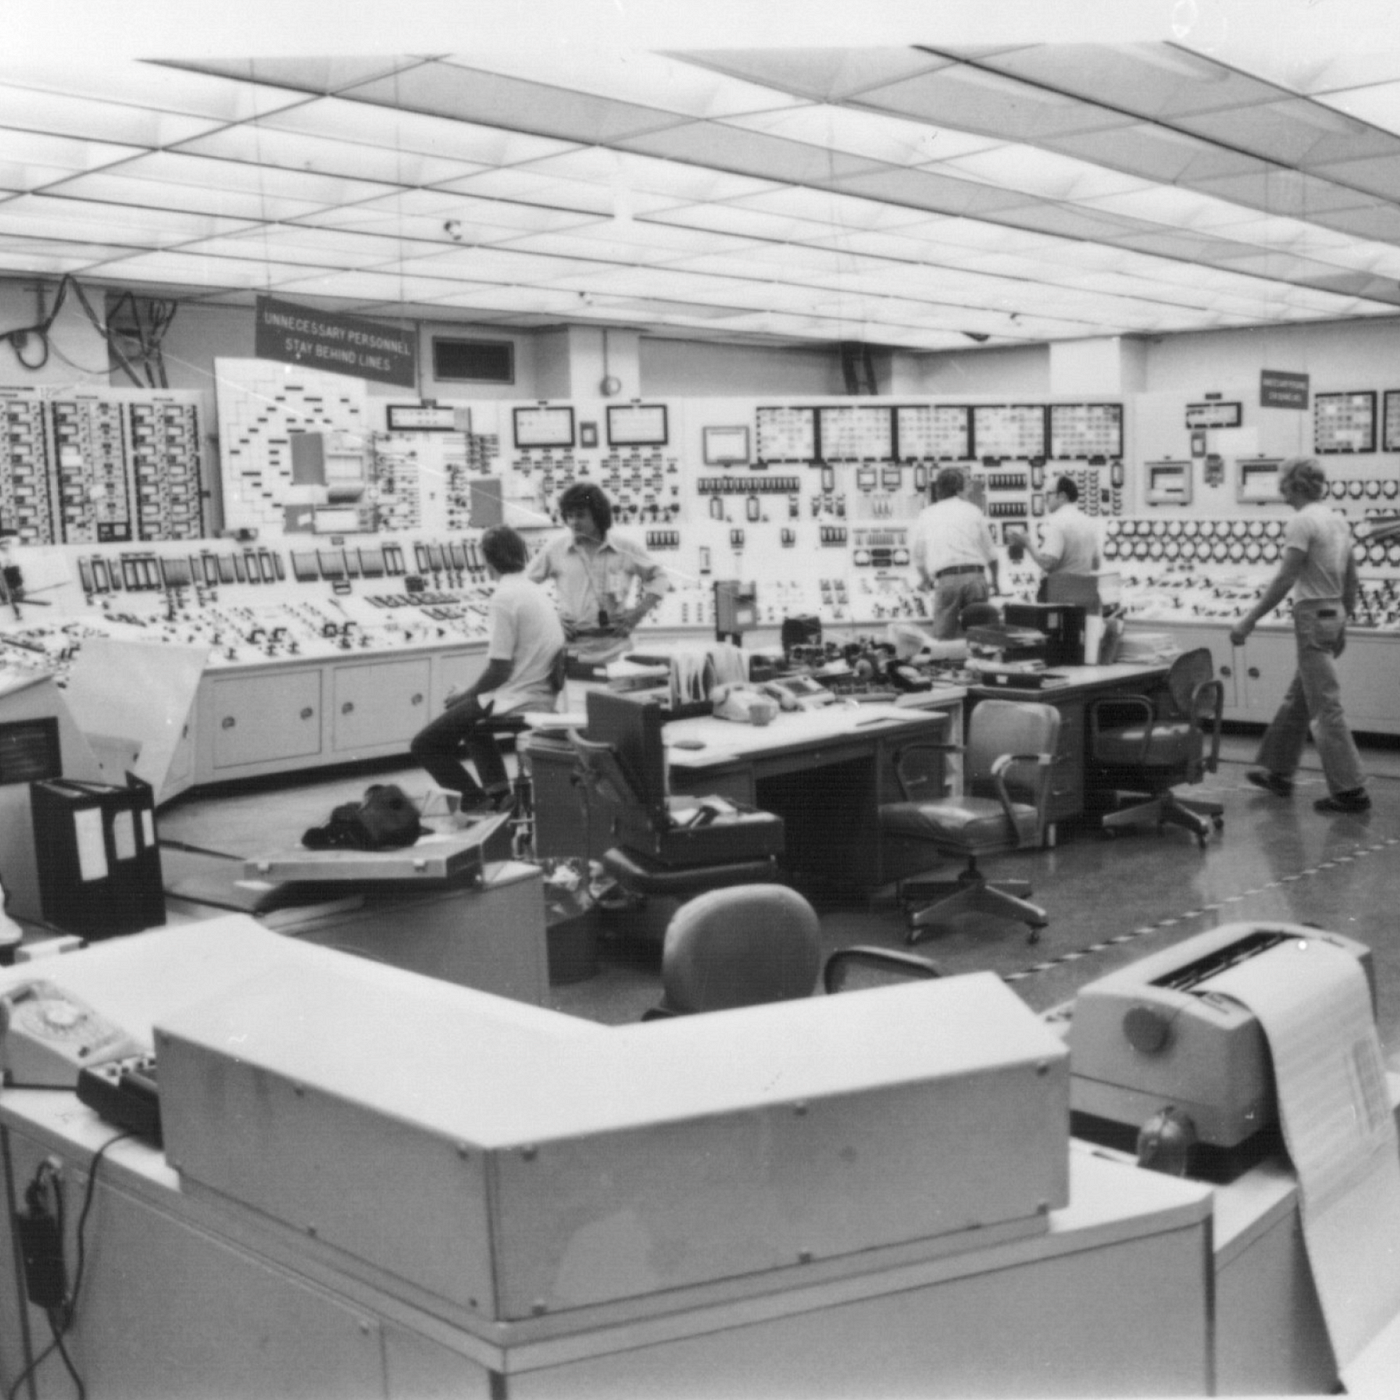 Control room image from the 1970s it is black and white